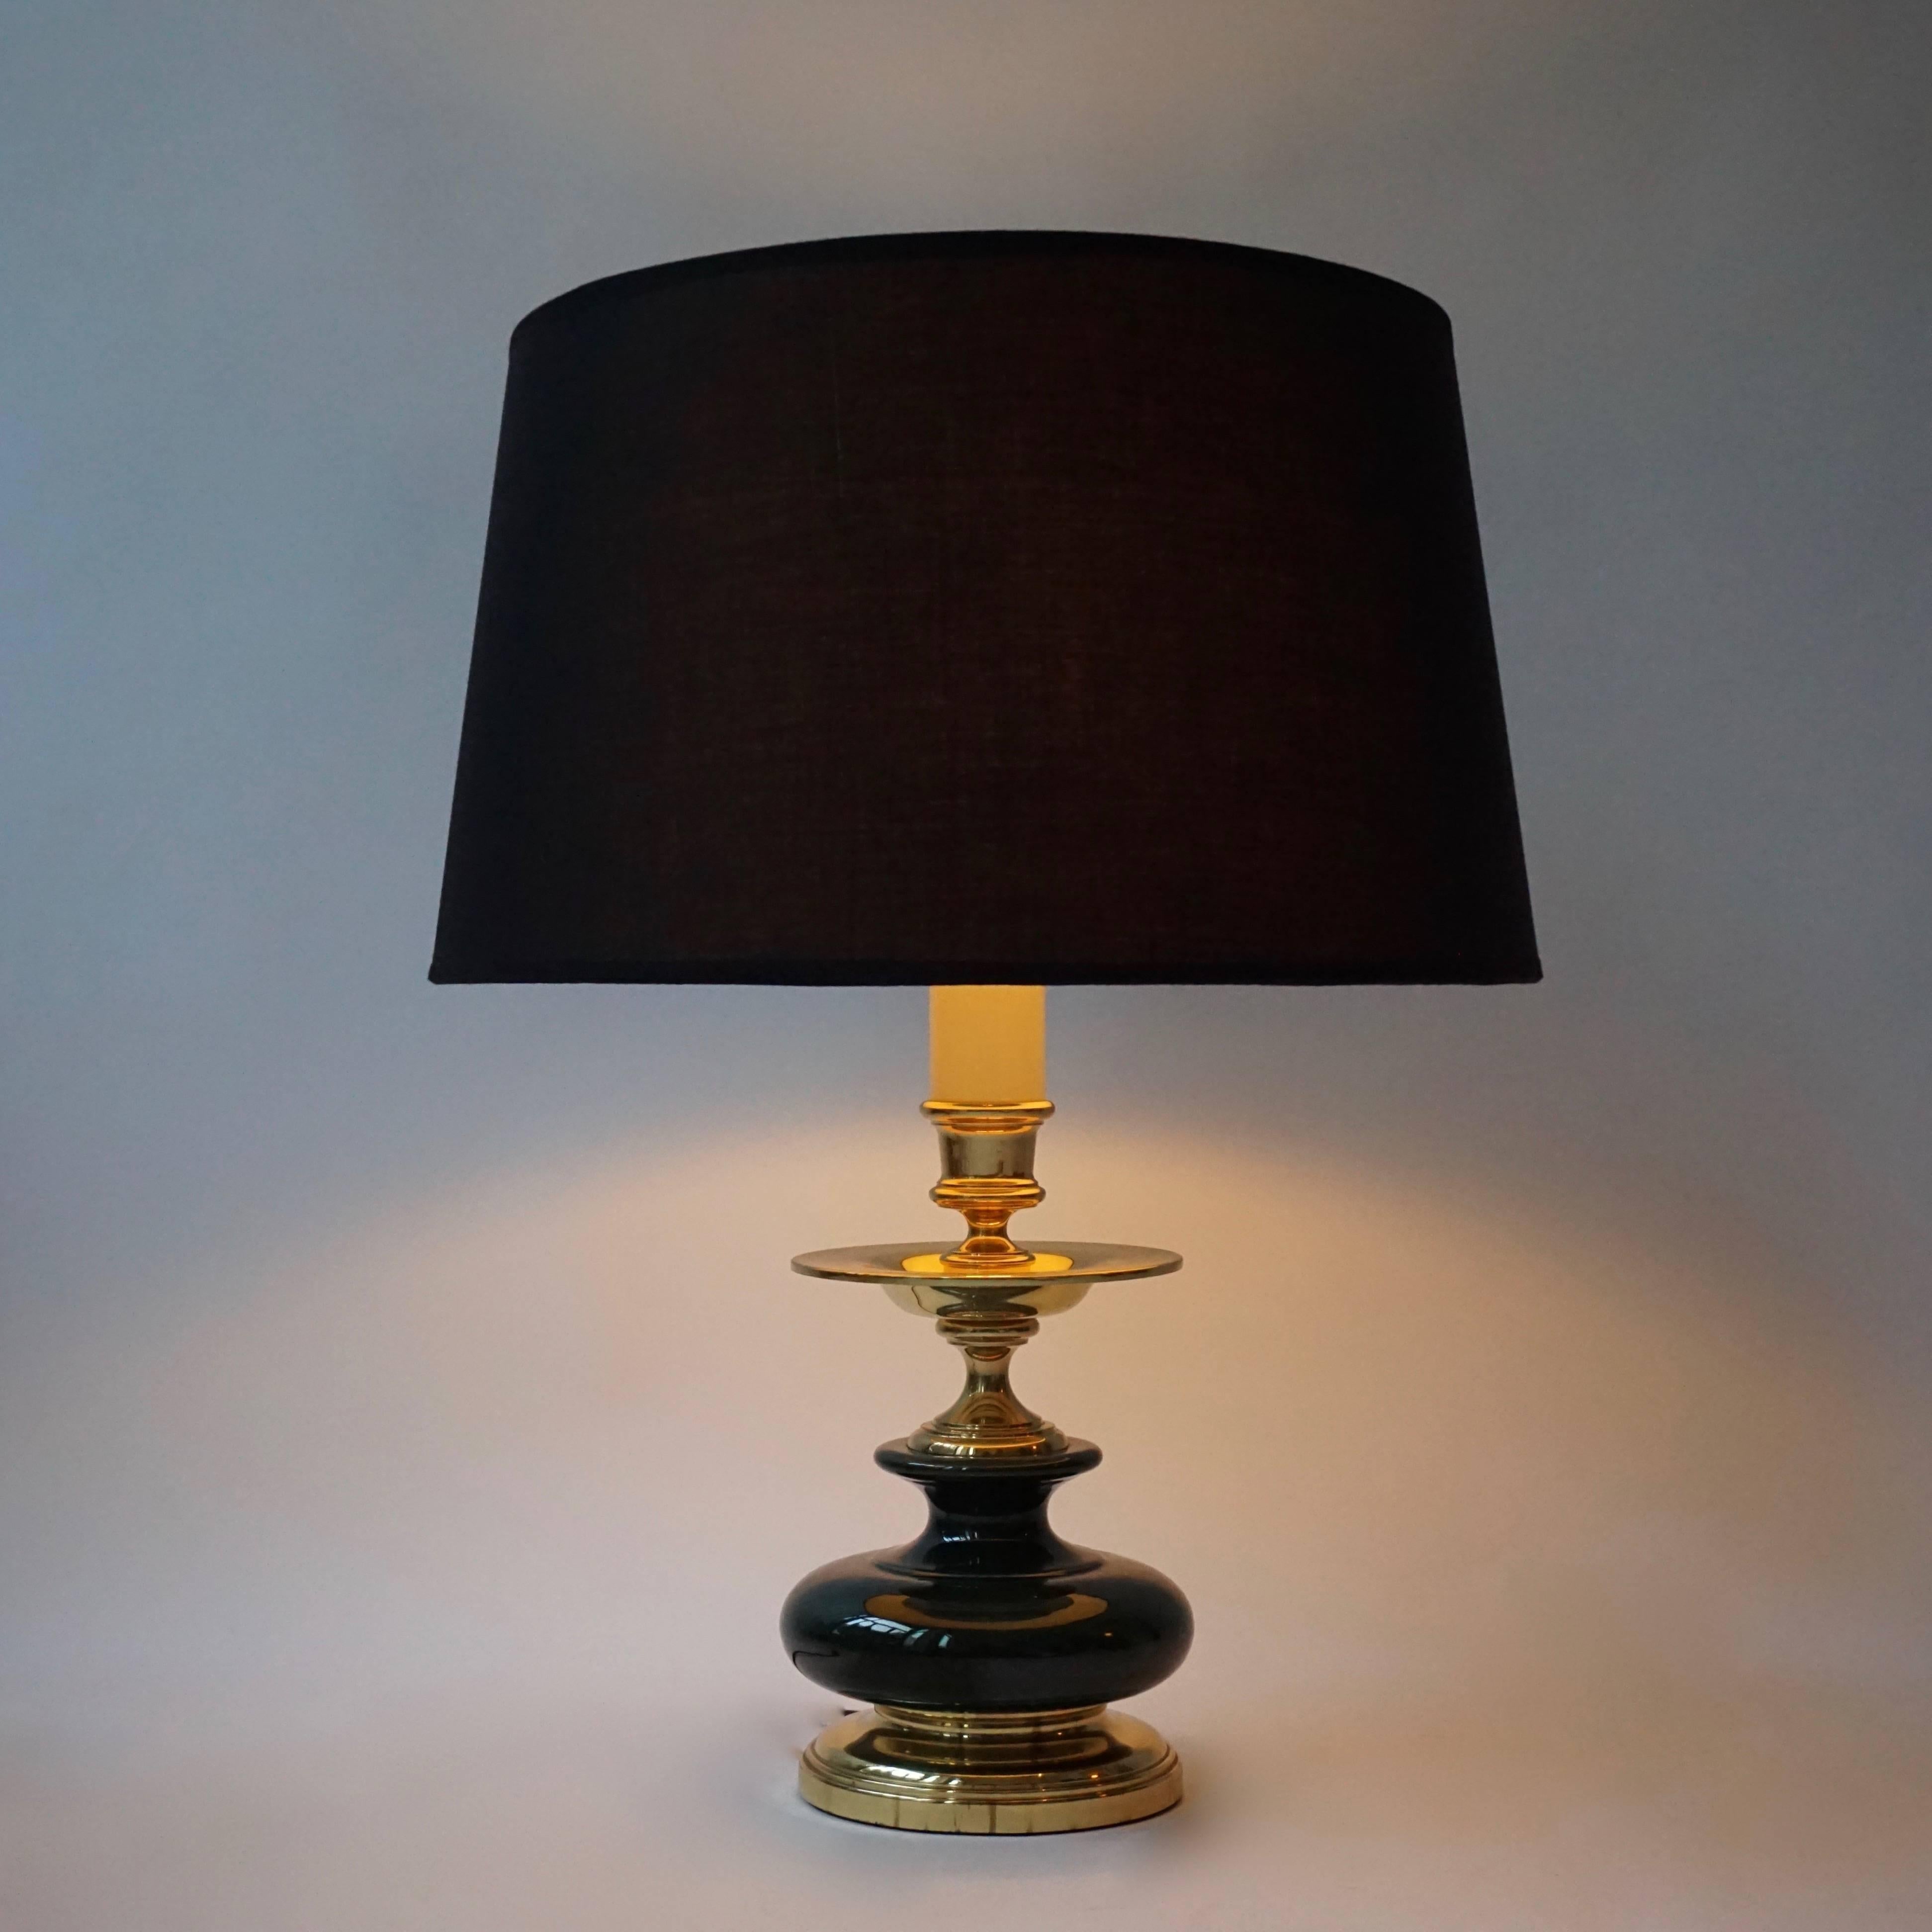 Two brass table lamps with dark green ceramic base.
Diameter shade 48 cm.
Height shade 27 cm.
Diameter base 17 cm.
Height without shade 45 cm.

Shades are not included in the price.